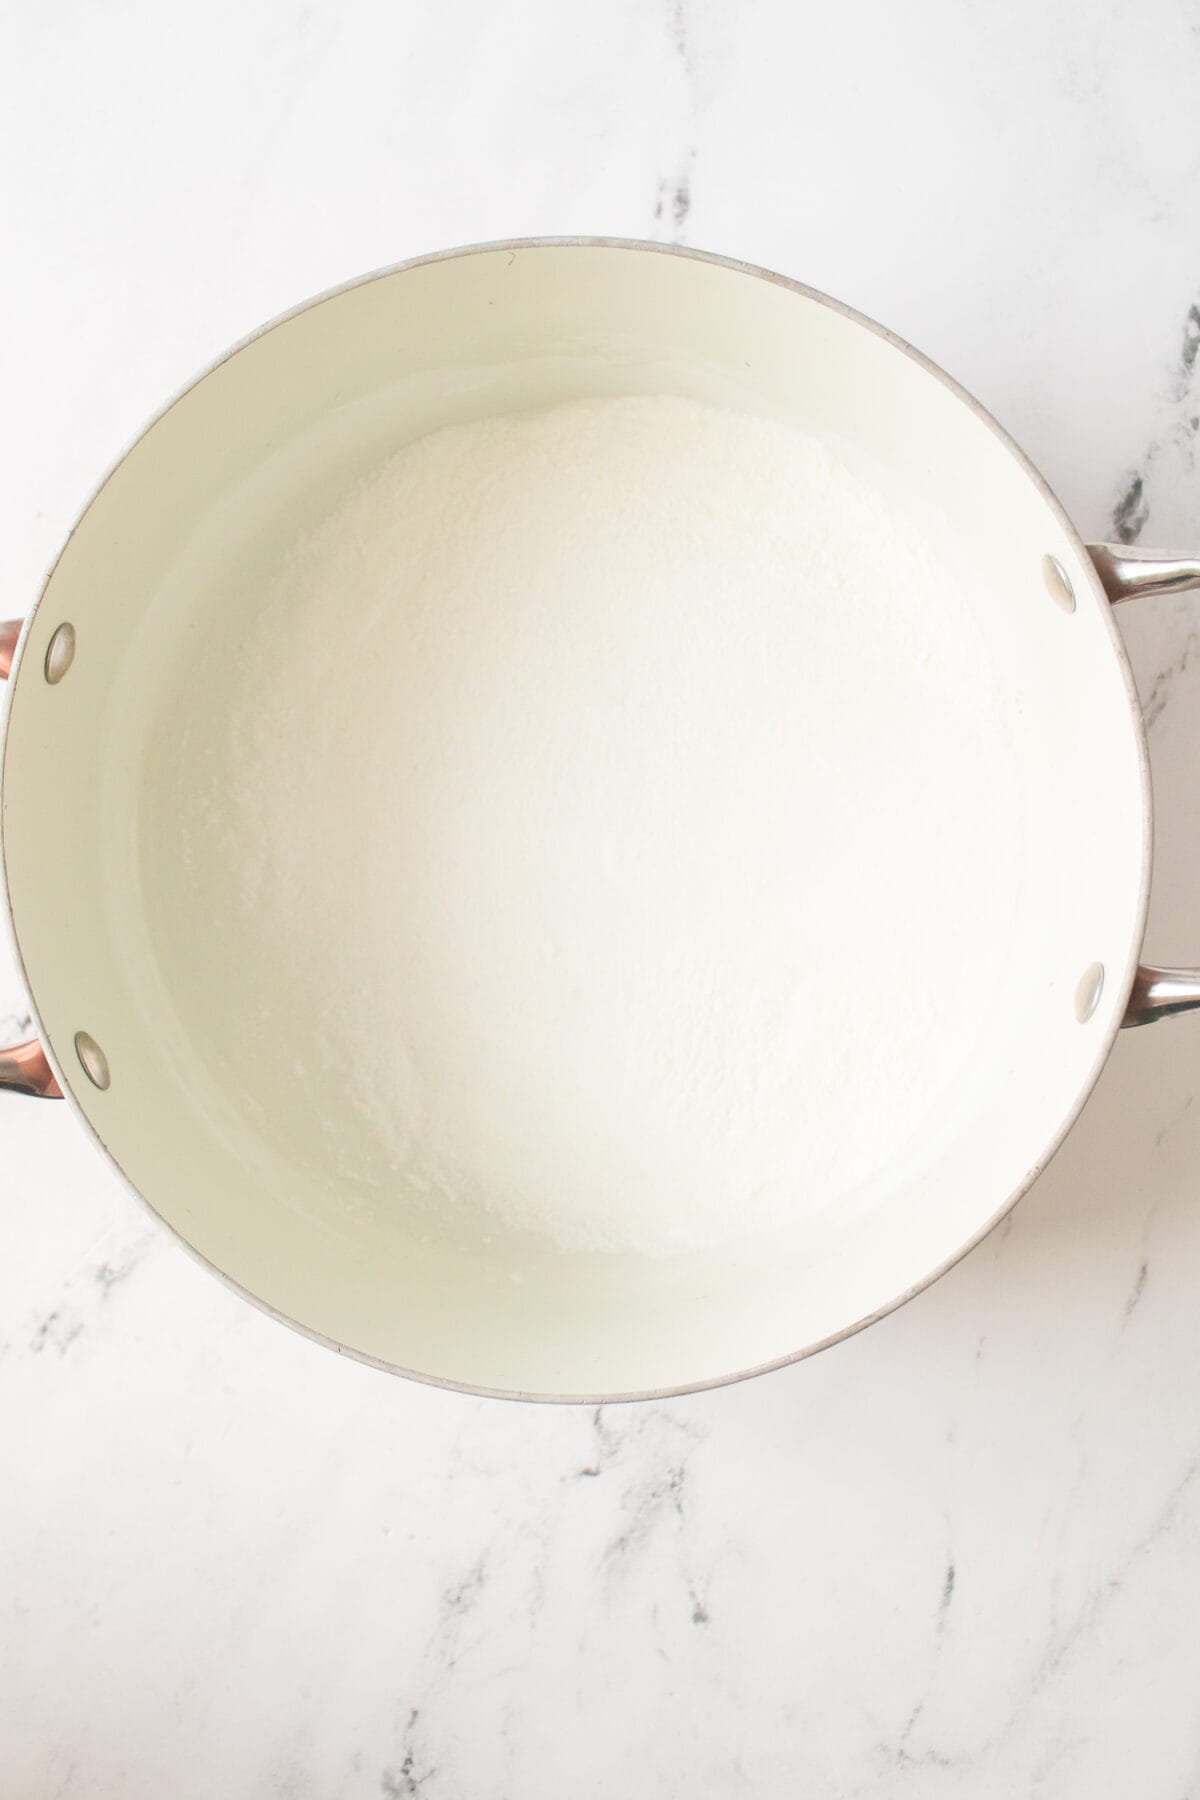 sugar and cornstarch whisked in pan